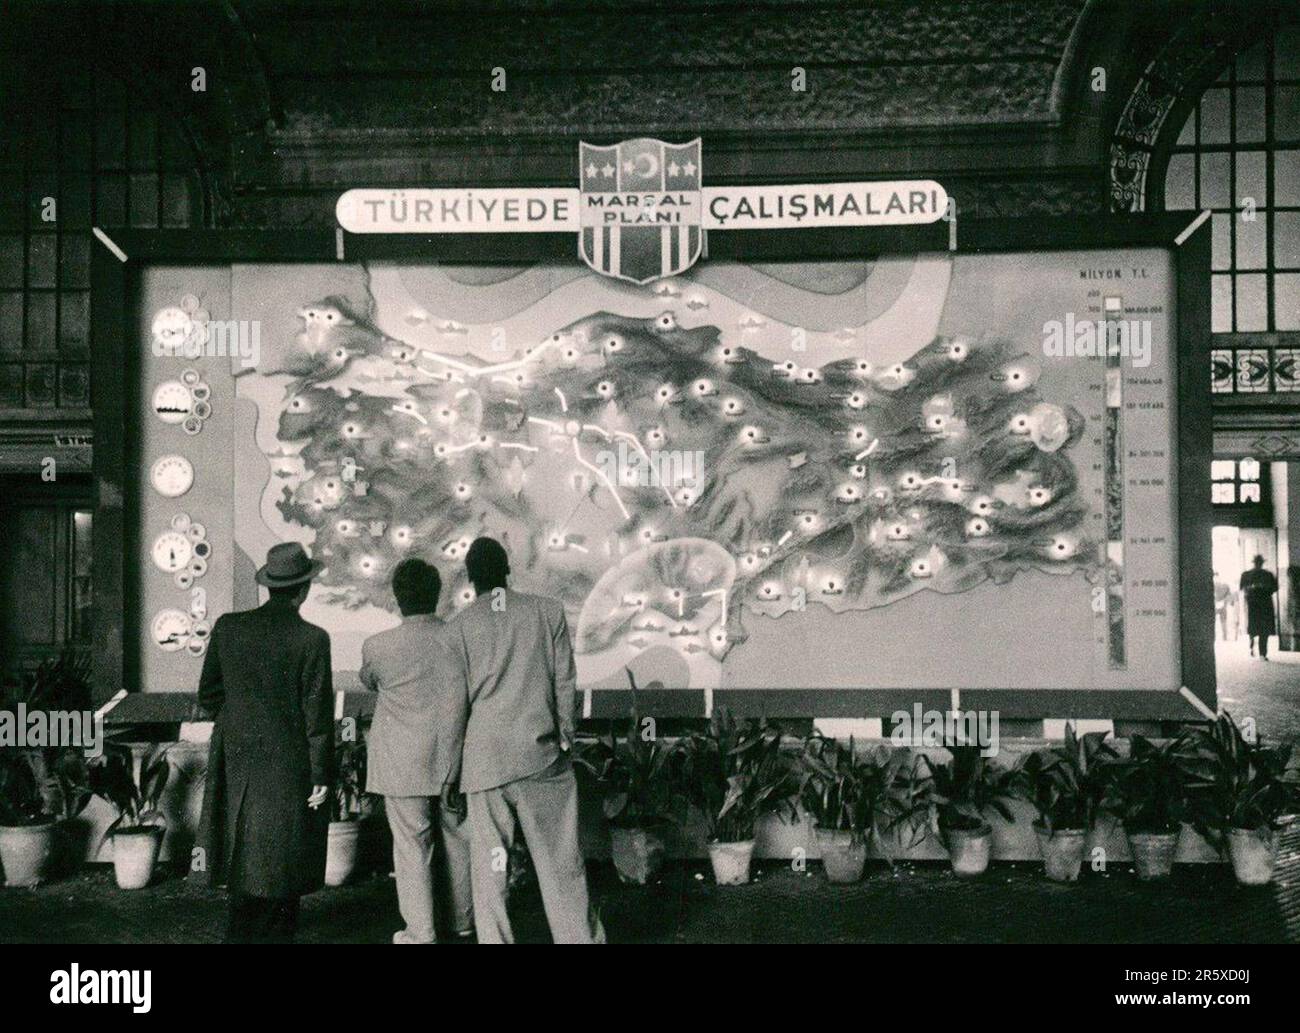 Men looking at a map of Turkey with sites being repaired with Marshall Plan funds marked. The Marshall Plan was a very ambitious financial aid program proposed by US Secretary of State George Marshall. He understood that a destroyed and prostrate Europe had to have financial help if it were to recover and to remove the threat of communist insurgency. The aid was given not lent and each country decided on how it would use the funds. In the three years of the program the US gave Europe $13 billion, a colossal sum worth $175 billion at todays values. This far-seeing and generous plan was a major Stock Photo